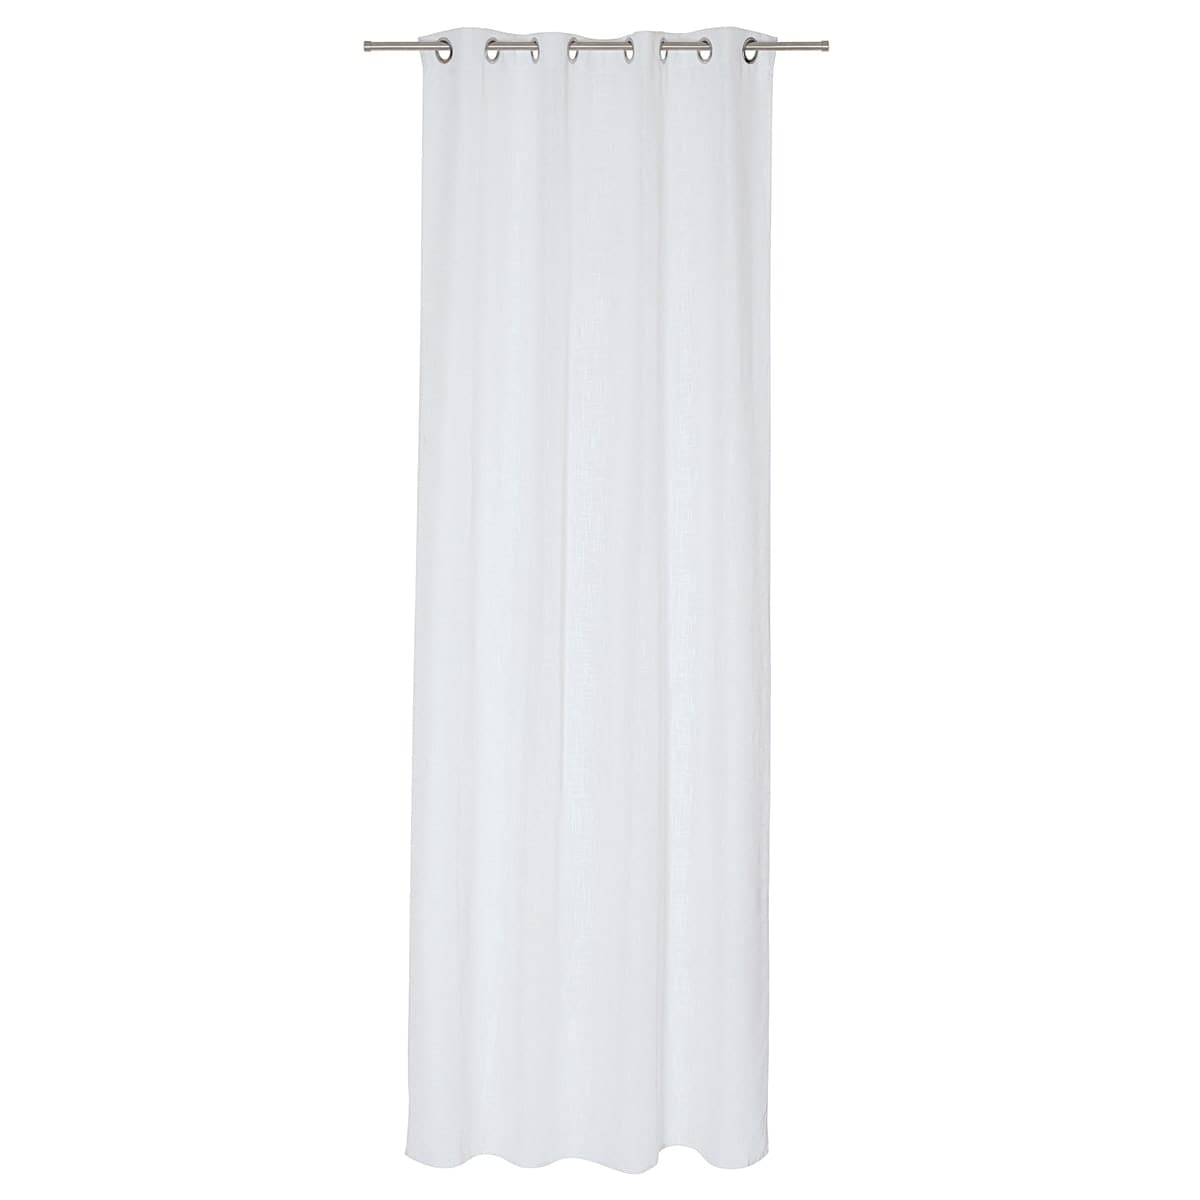 INFINI WHITE OPAQUE CURTAIN 140X280 CM WITH EYELETS - best price from Maltashopper.com BR480007998